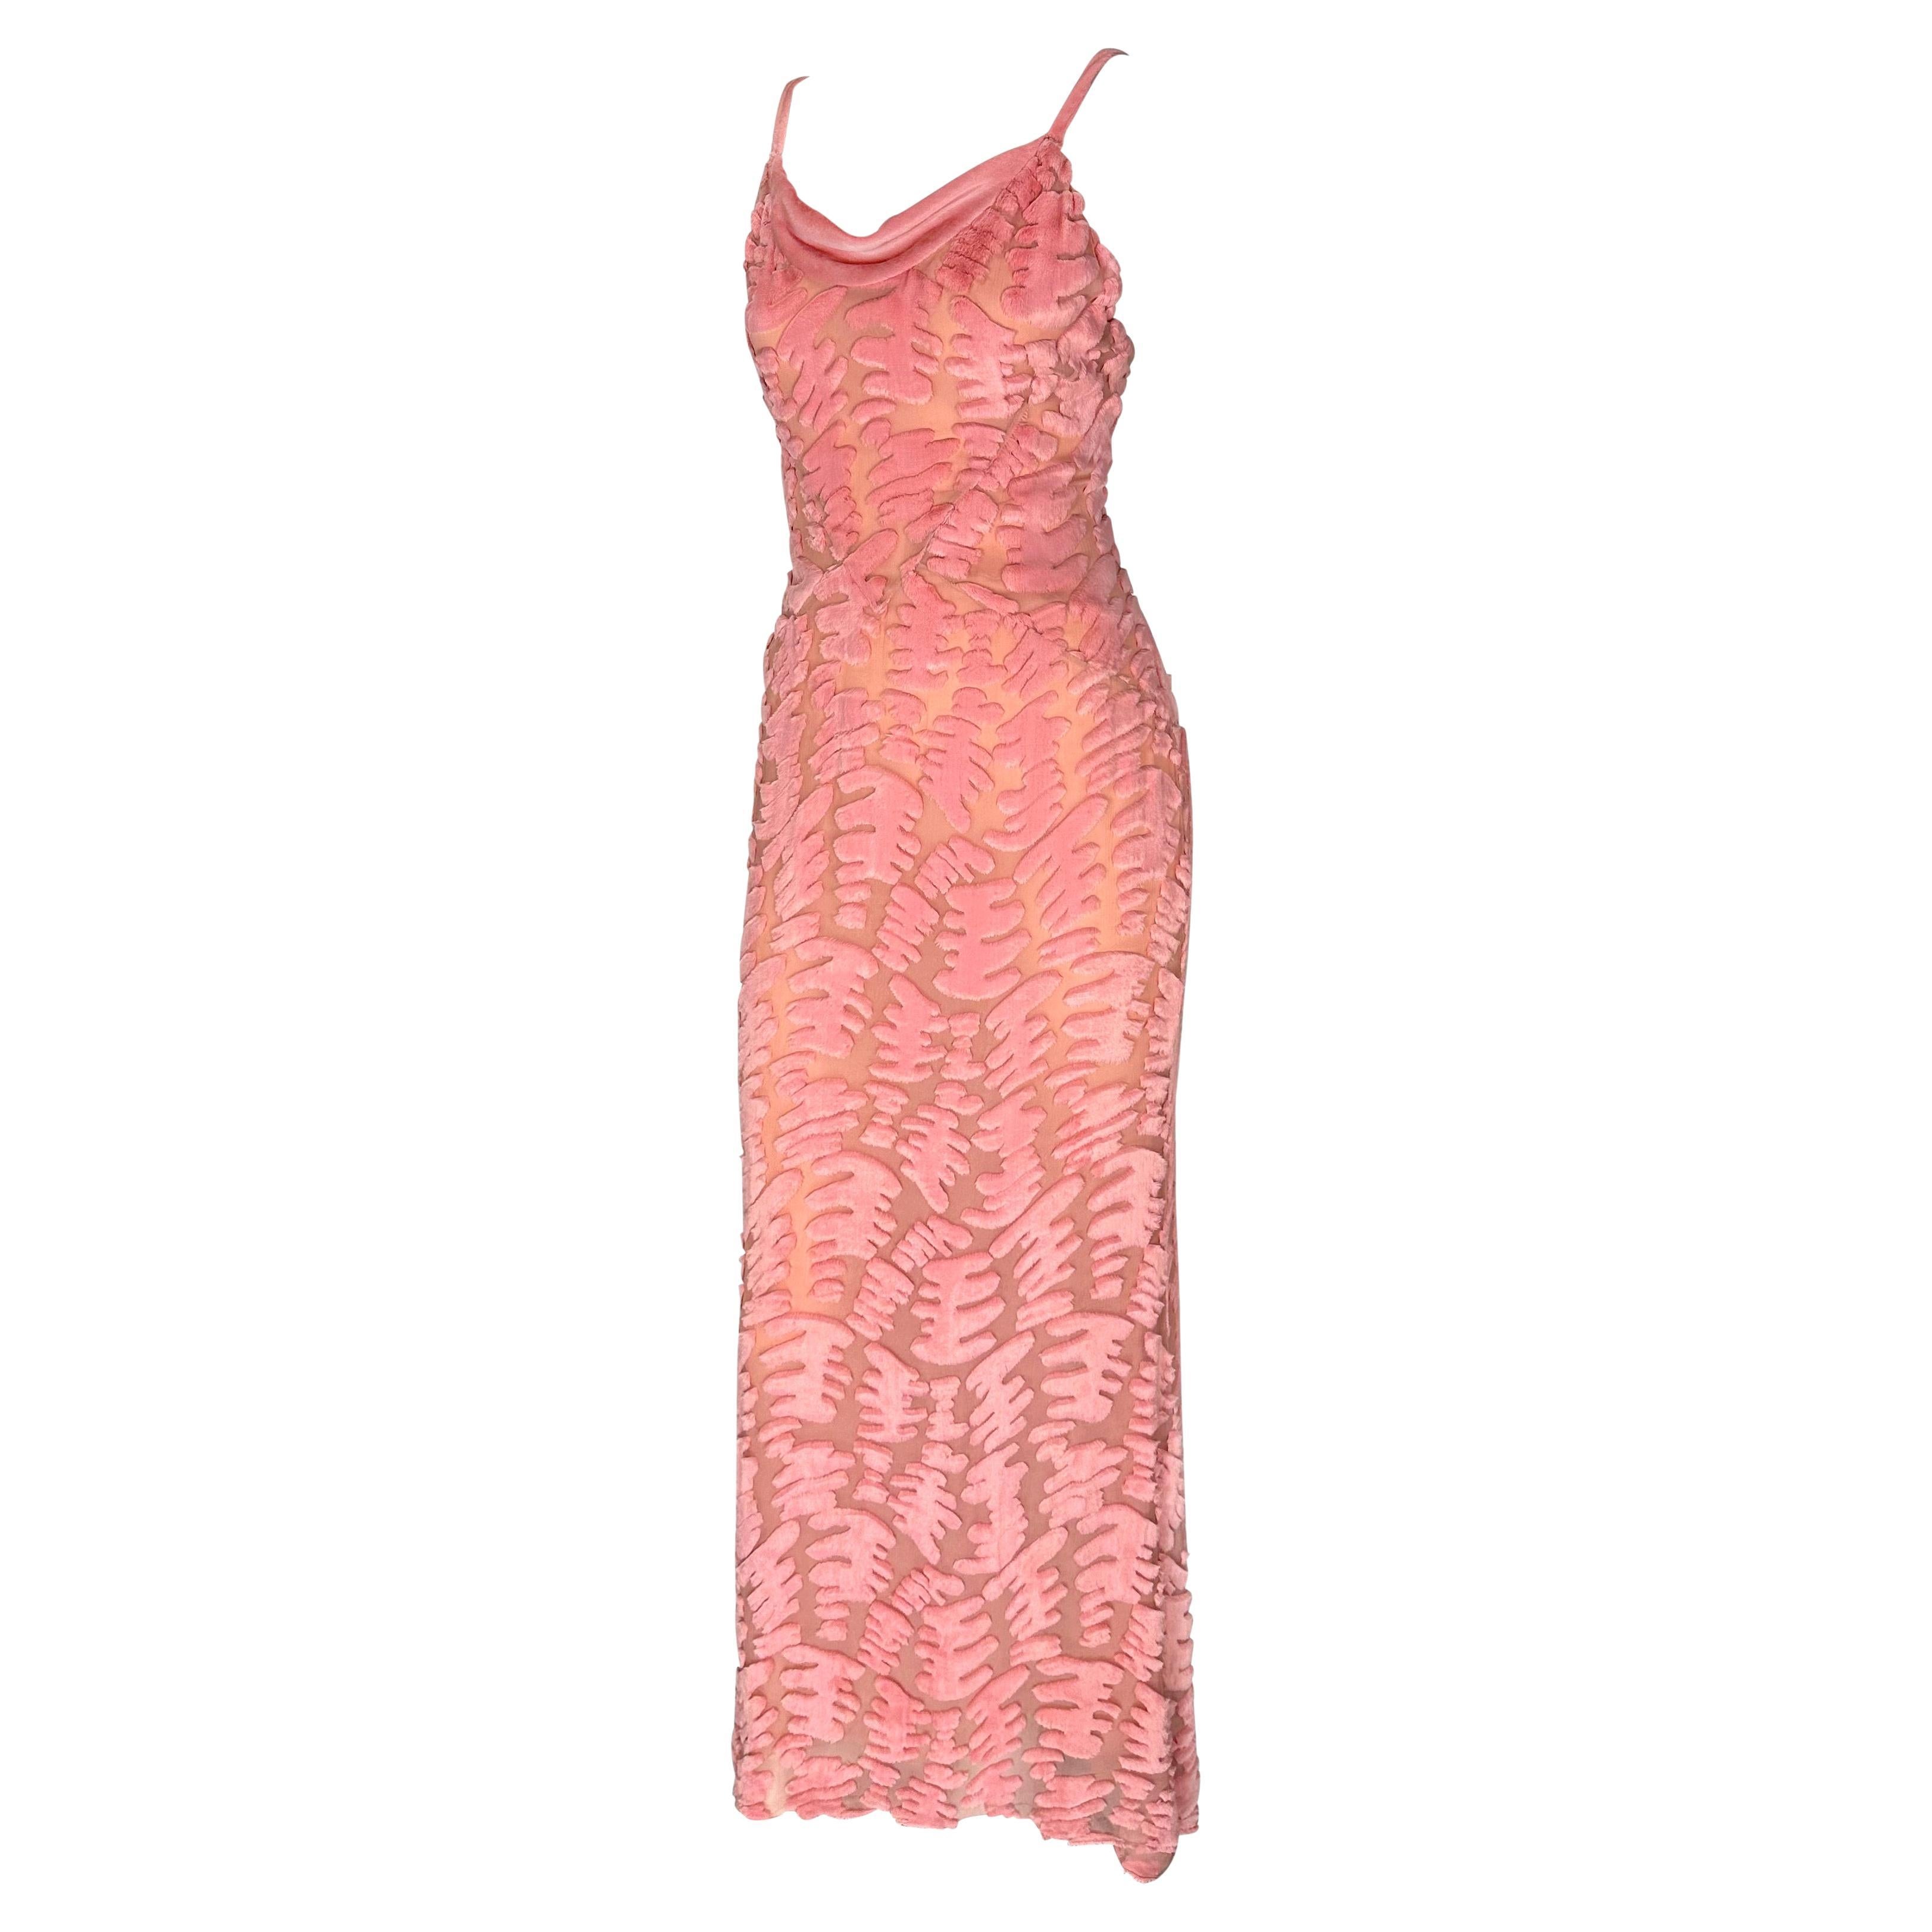 Women's F/W 1997 Chloé by Karl Lagerfeld Pink Sheer Chiffon Abstract Chenille Gown For Sale